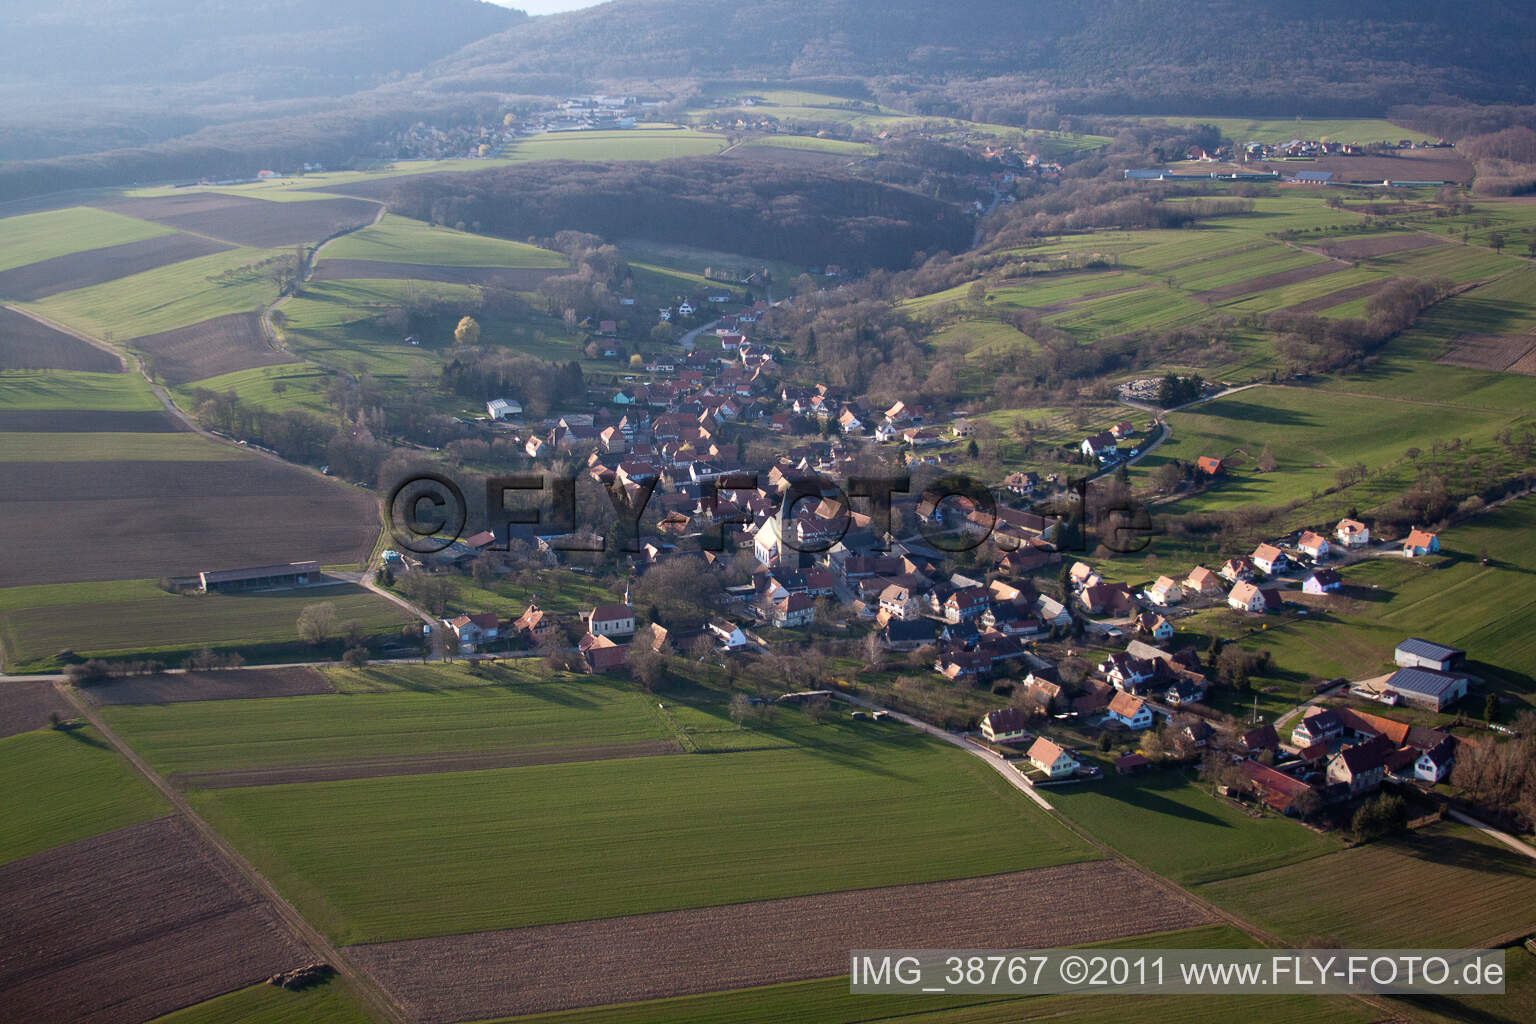 Aerial view of Village - view on the edge of agricultural fields and farmland in Drachenbronn-Birlenbach in Grand Est, France